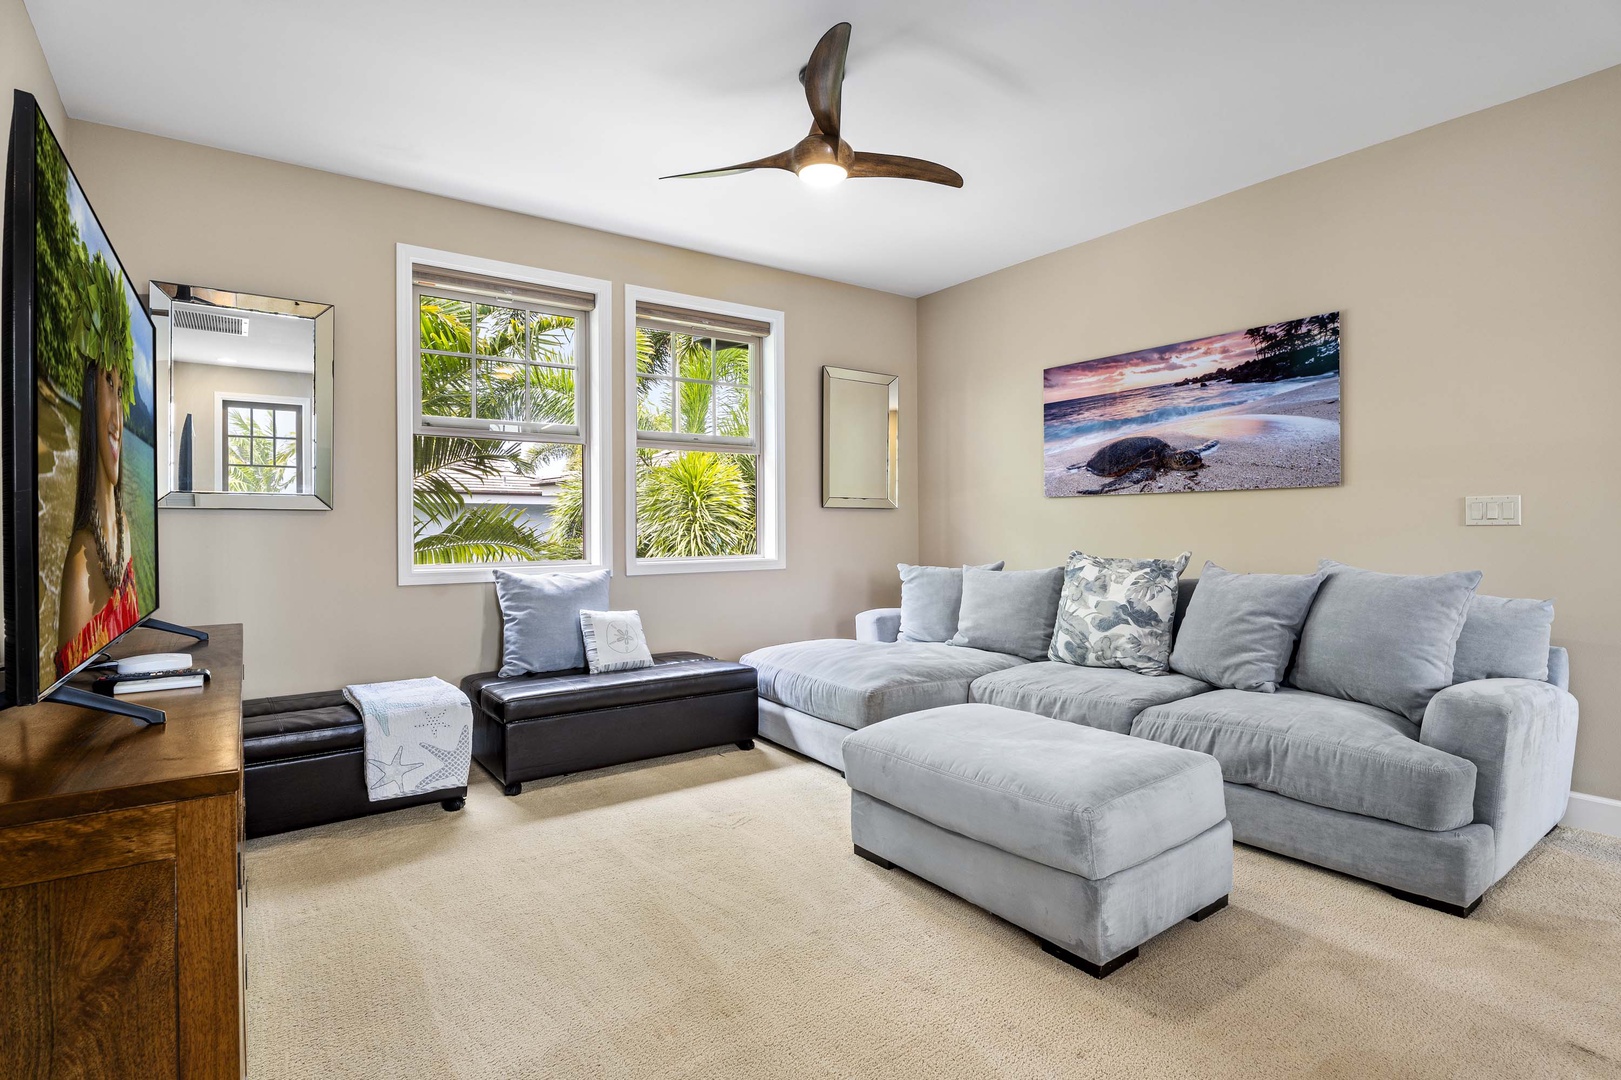 Kailua Kona Vacation Rentals, Holua Kai #20 - Upstairs living room equipped with two fold away Twin beds